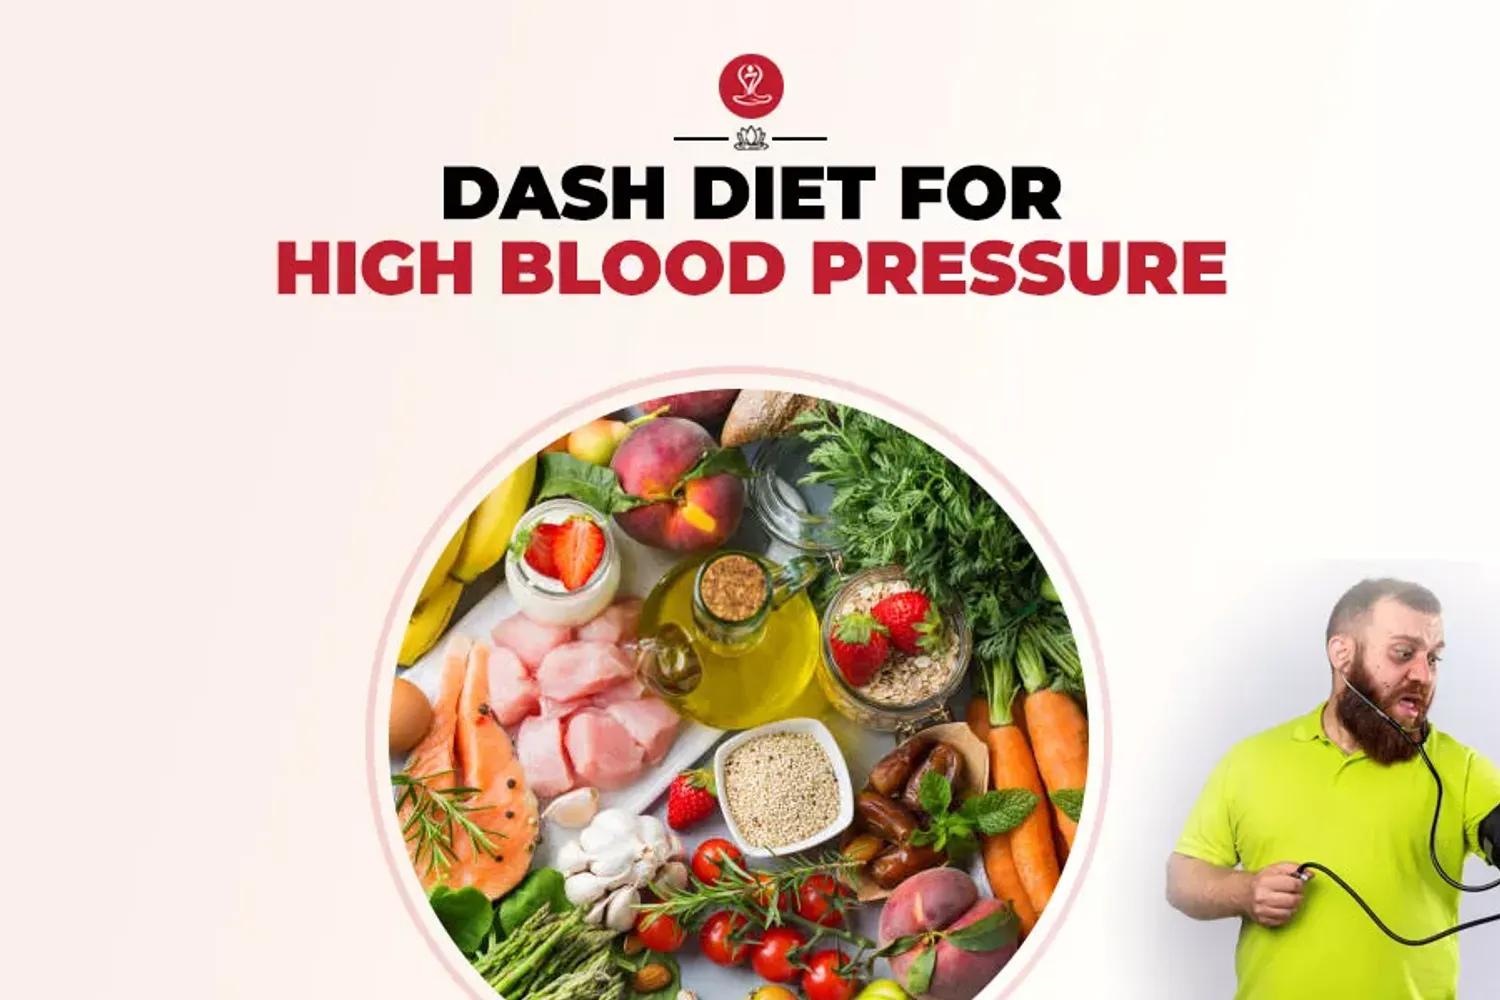 DASH Diet - An Approach to Stop High Blood Pressure